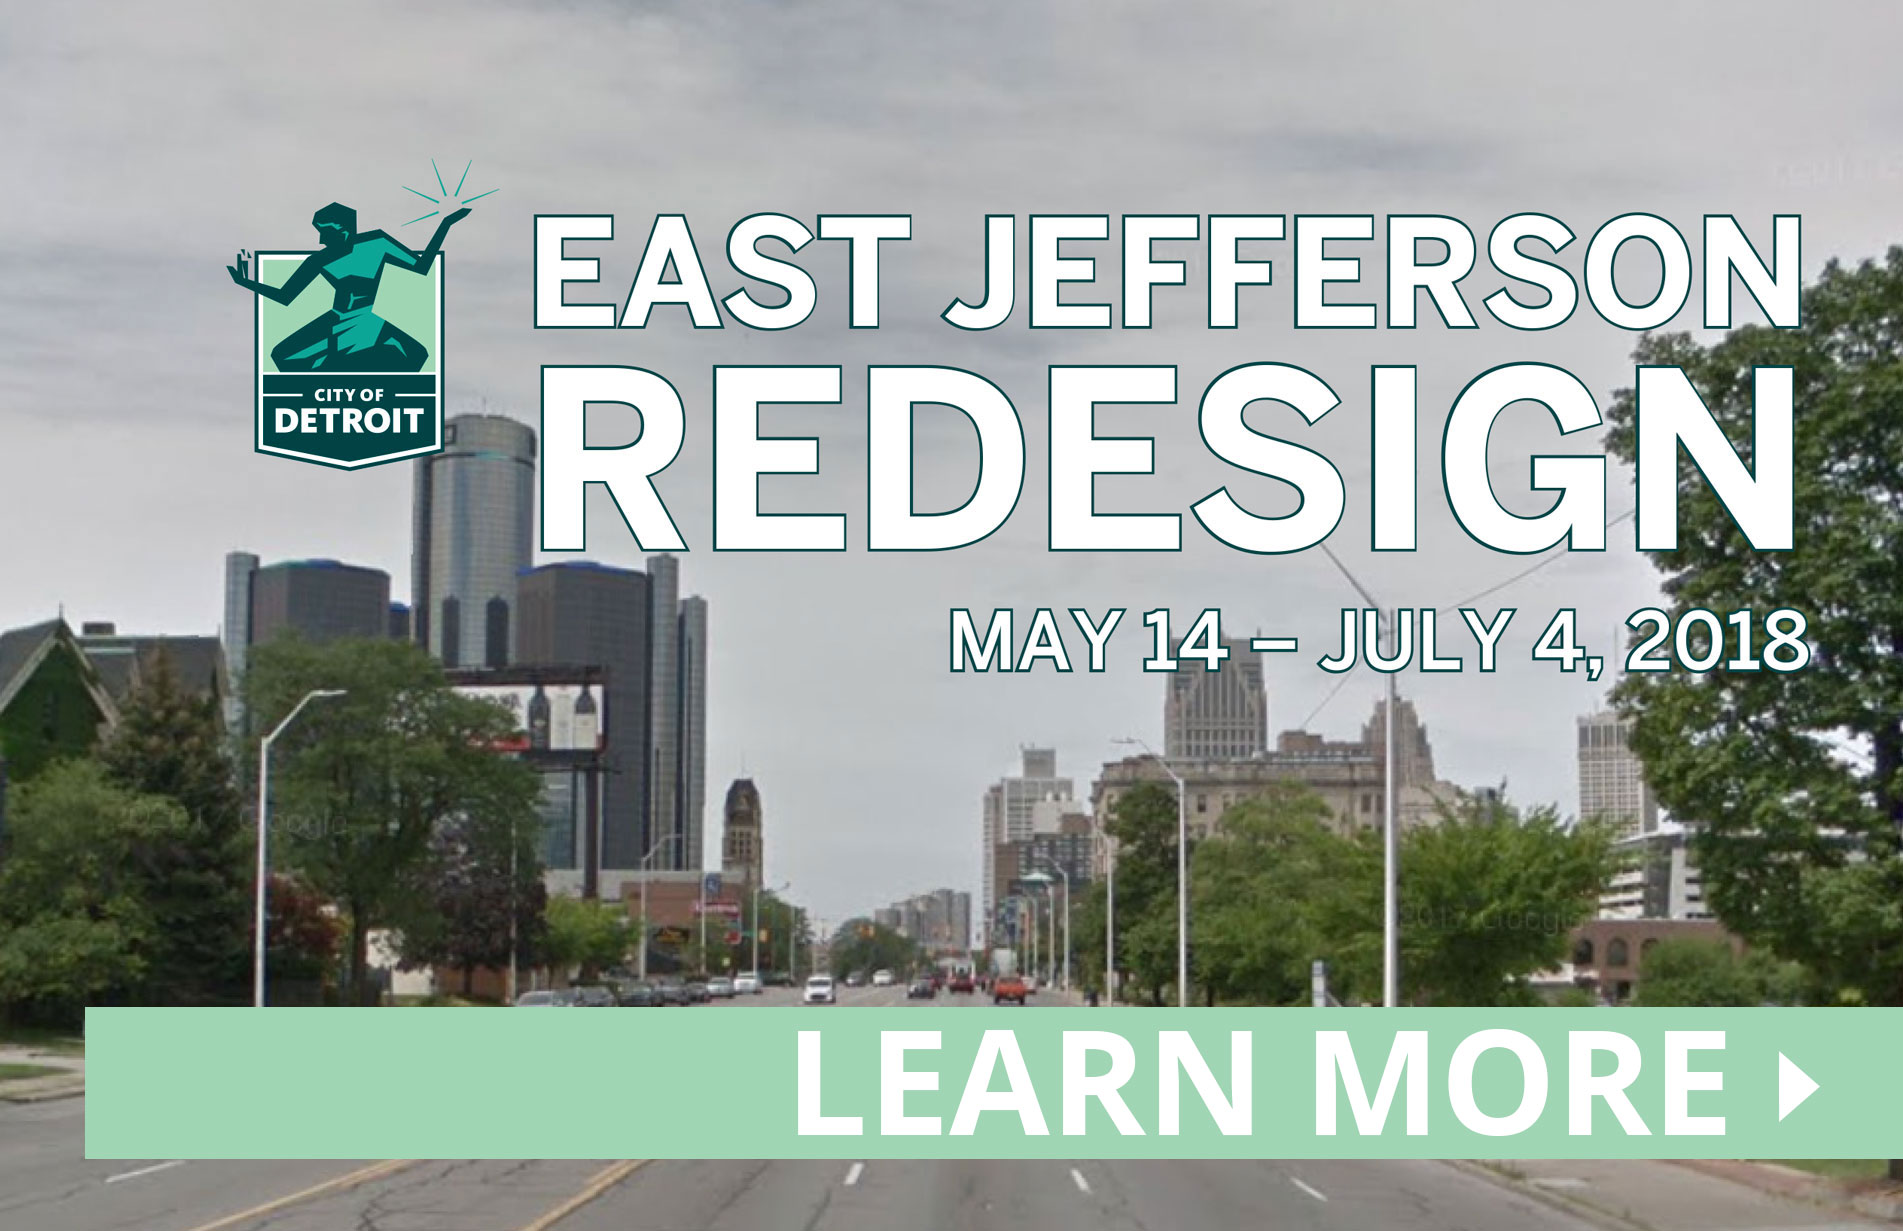 Learn more about the East Jefferson Redesign